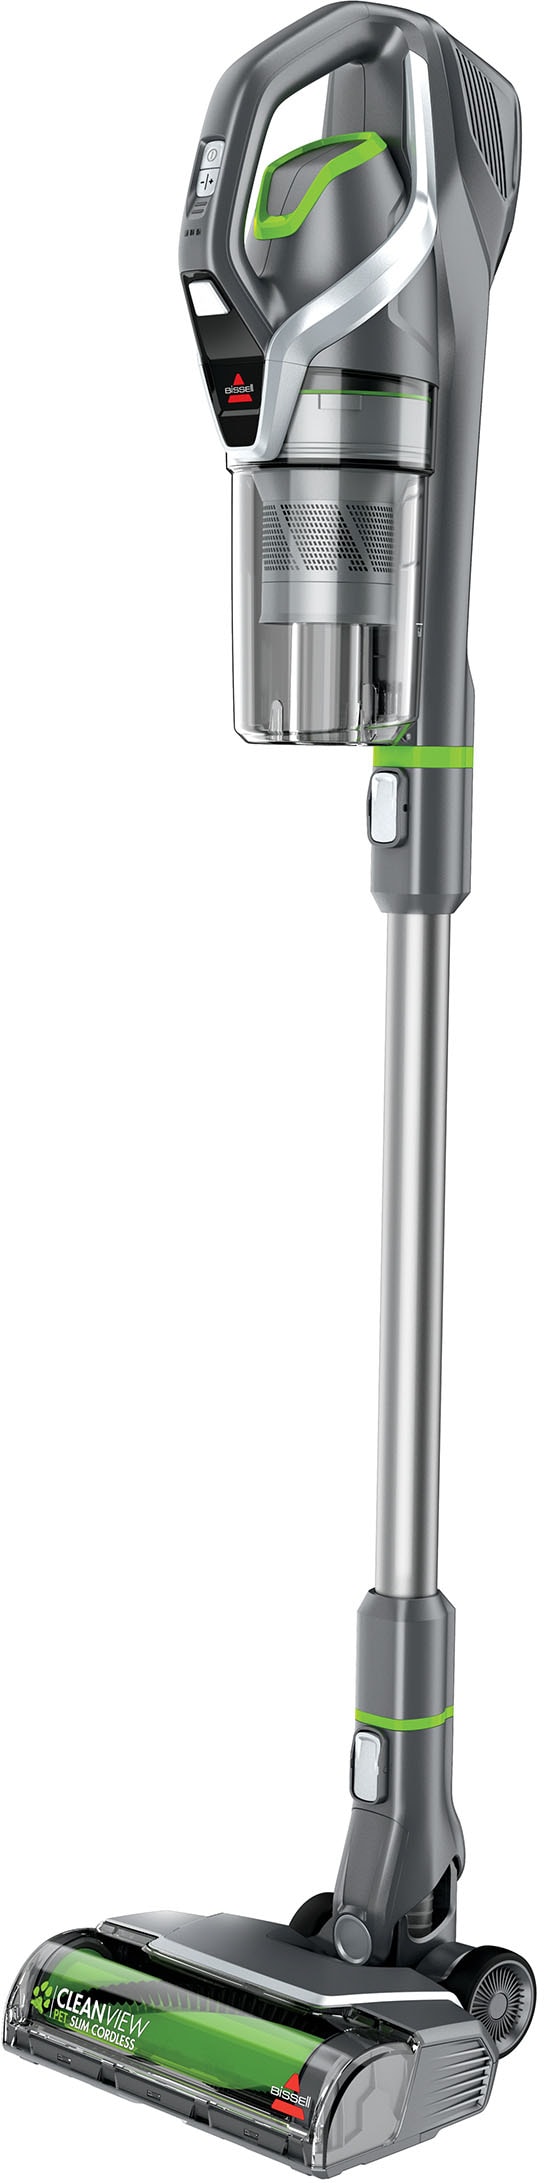 BISSELL - CleanView Pet Slim Cordless Stick Vacuum - Silver/Titanium with ChaCha Live Accents_1